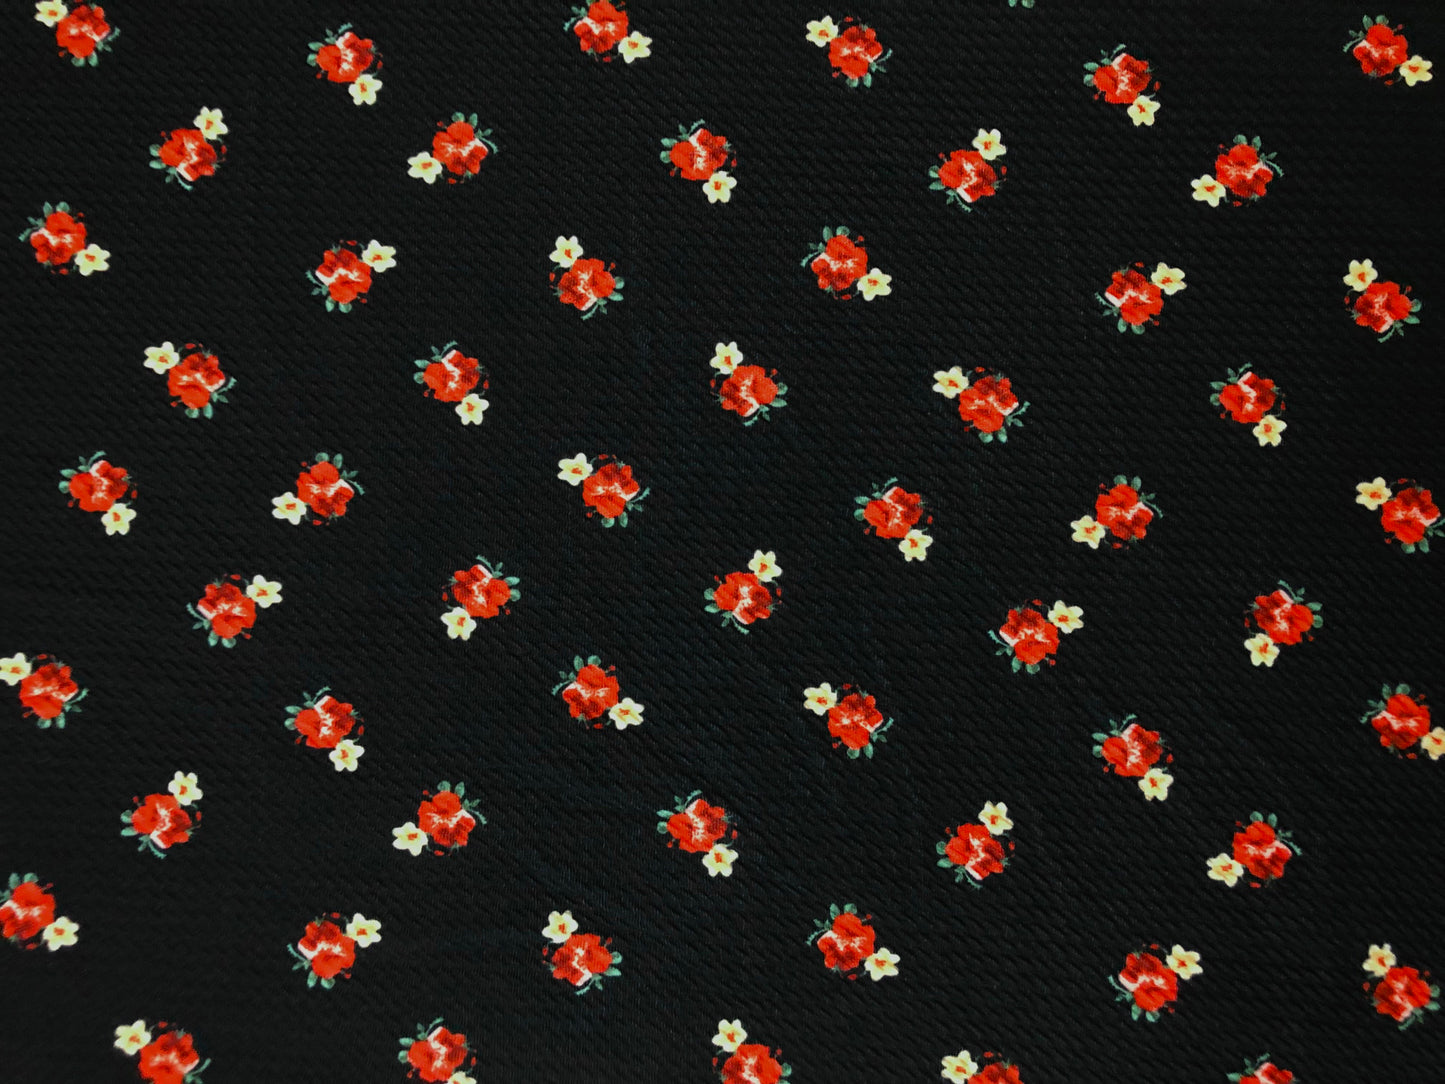 Bullet Knit Printed Fabric-Black Red Roses-BPR268-Sold by the Yard